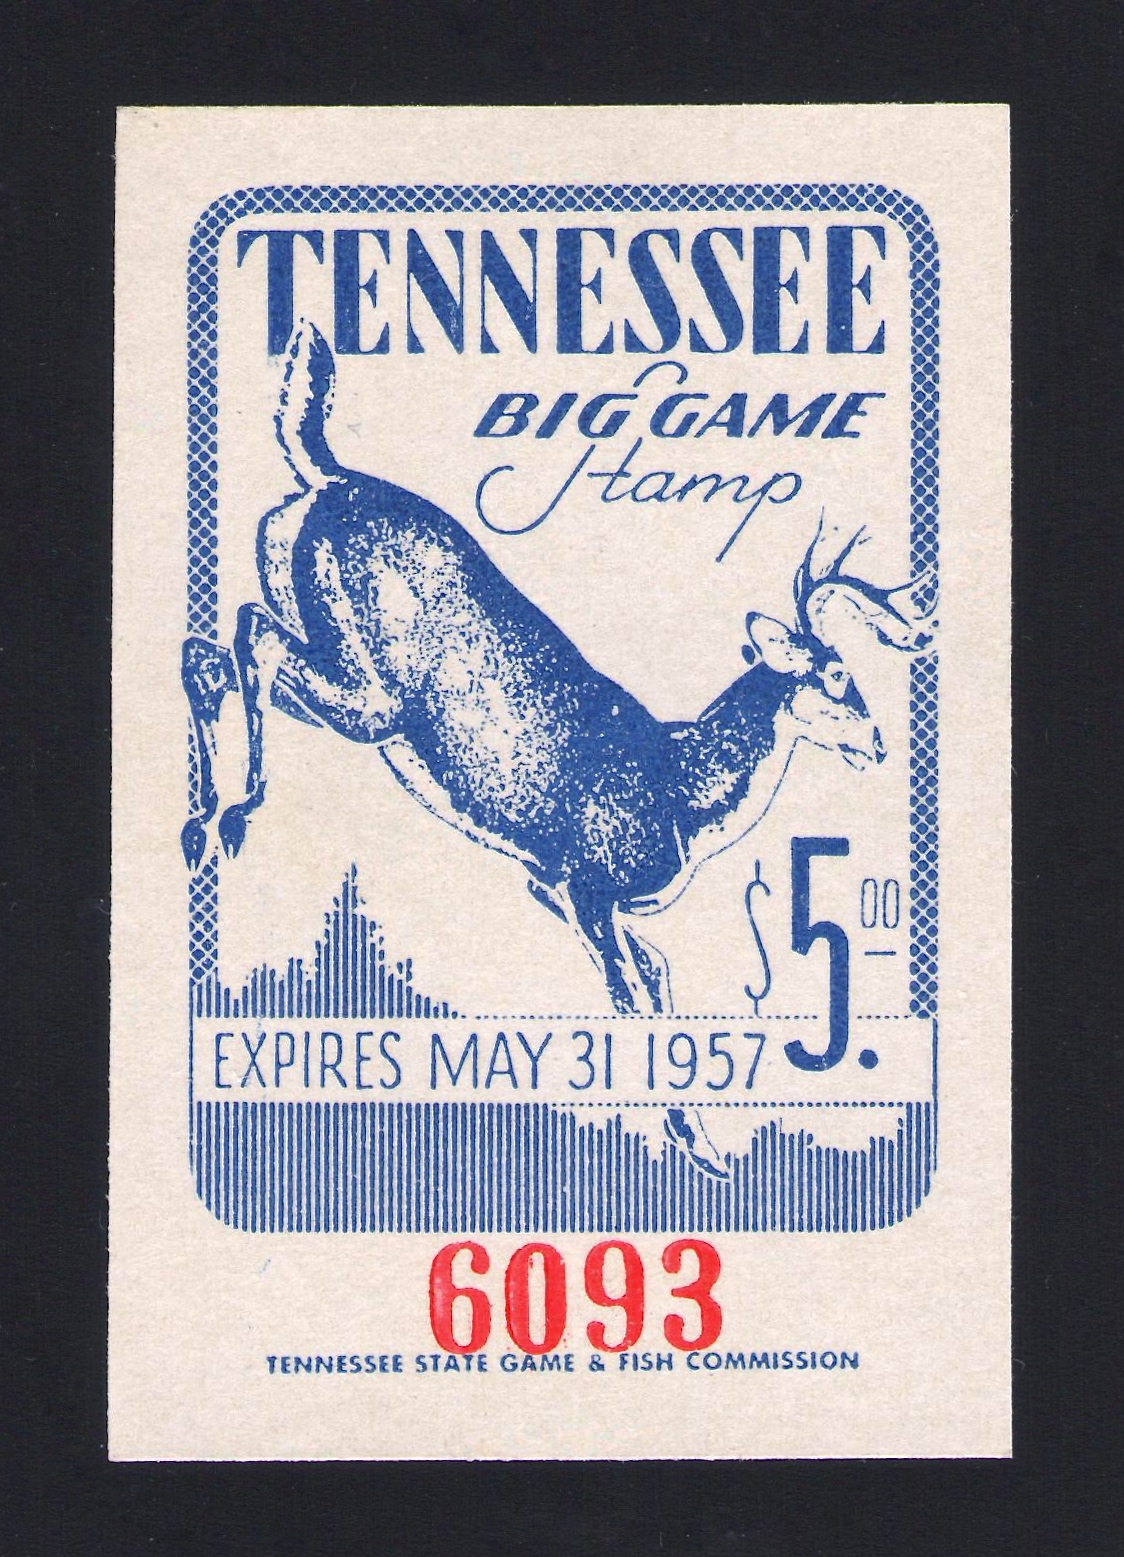 Type I 1956-57 Tennessee Big Game